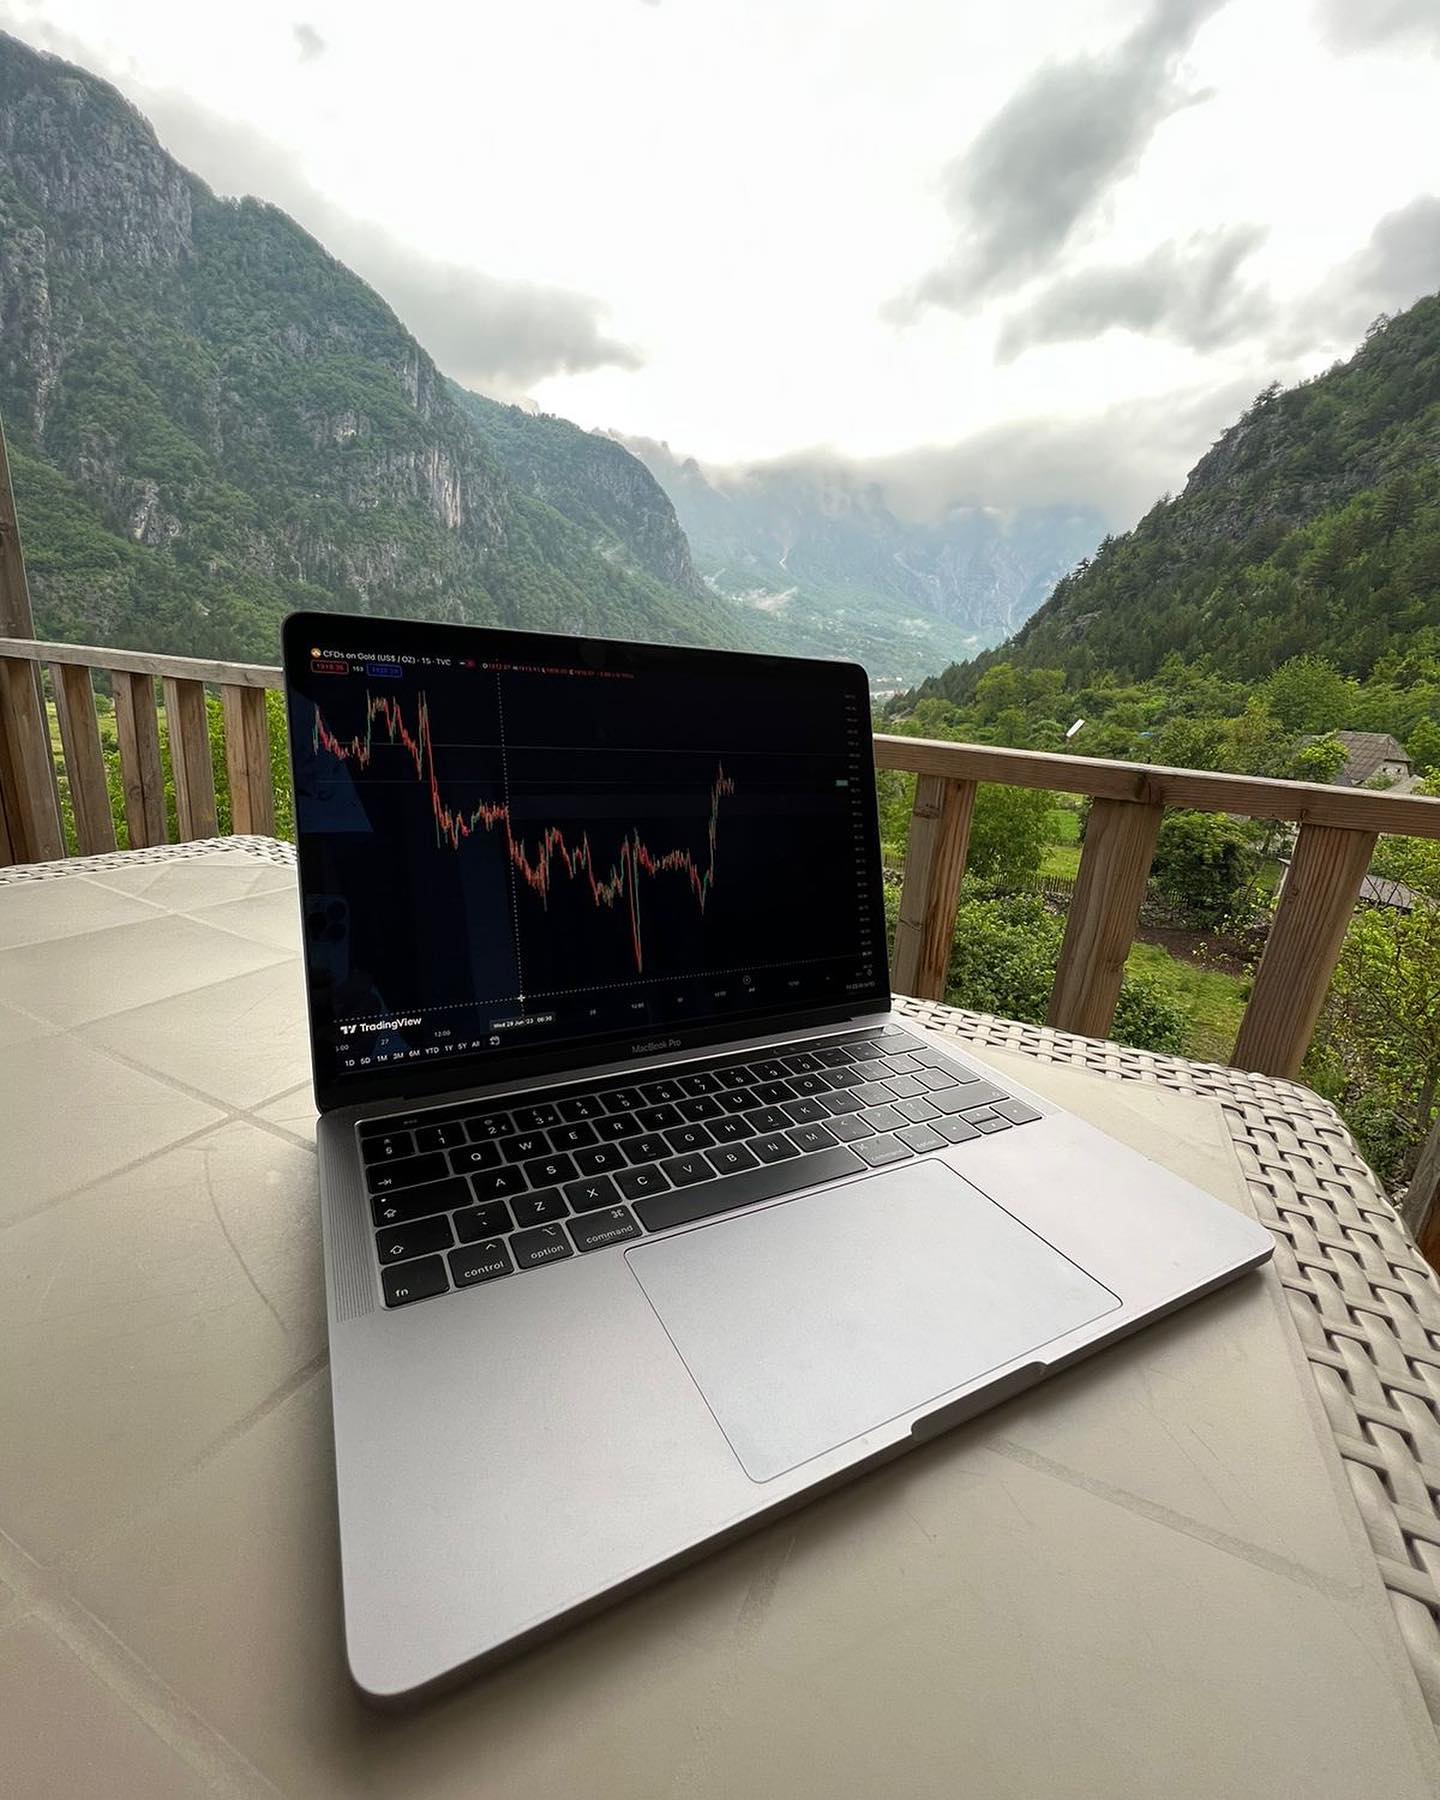 TradingView Chart on Instagram @fx_youngboy